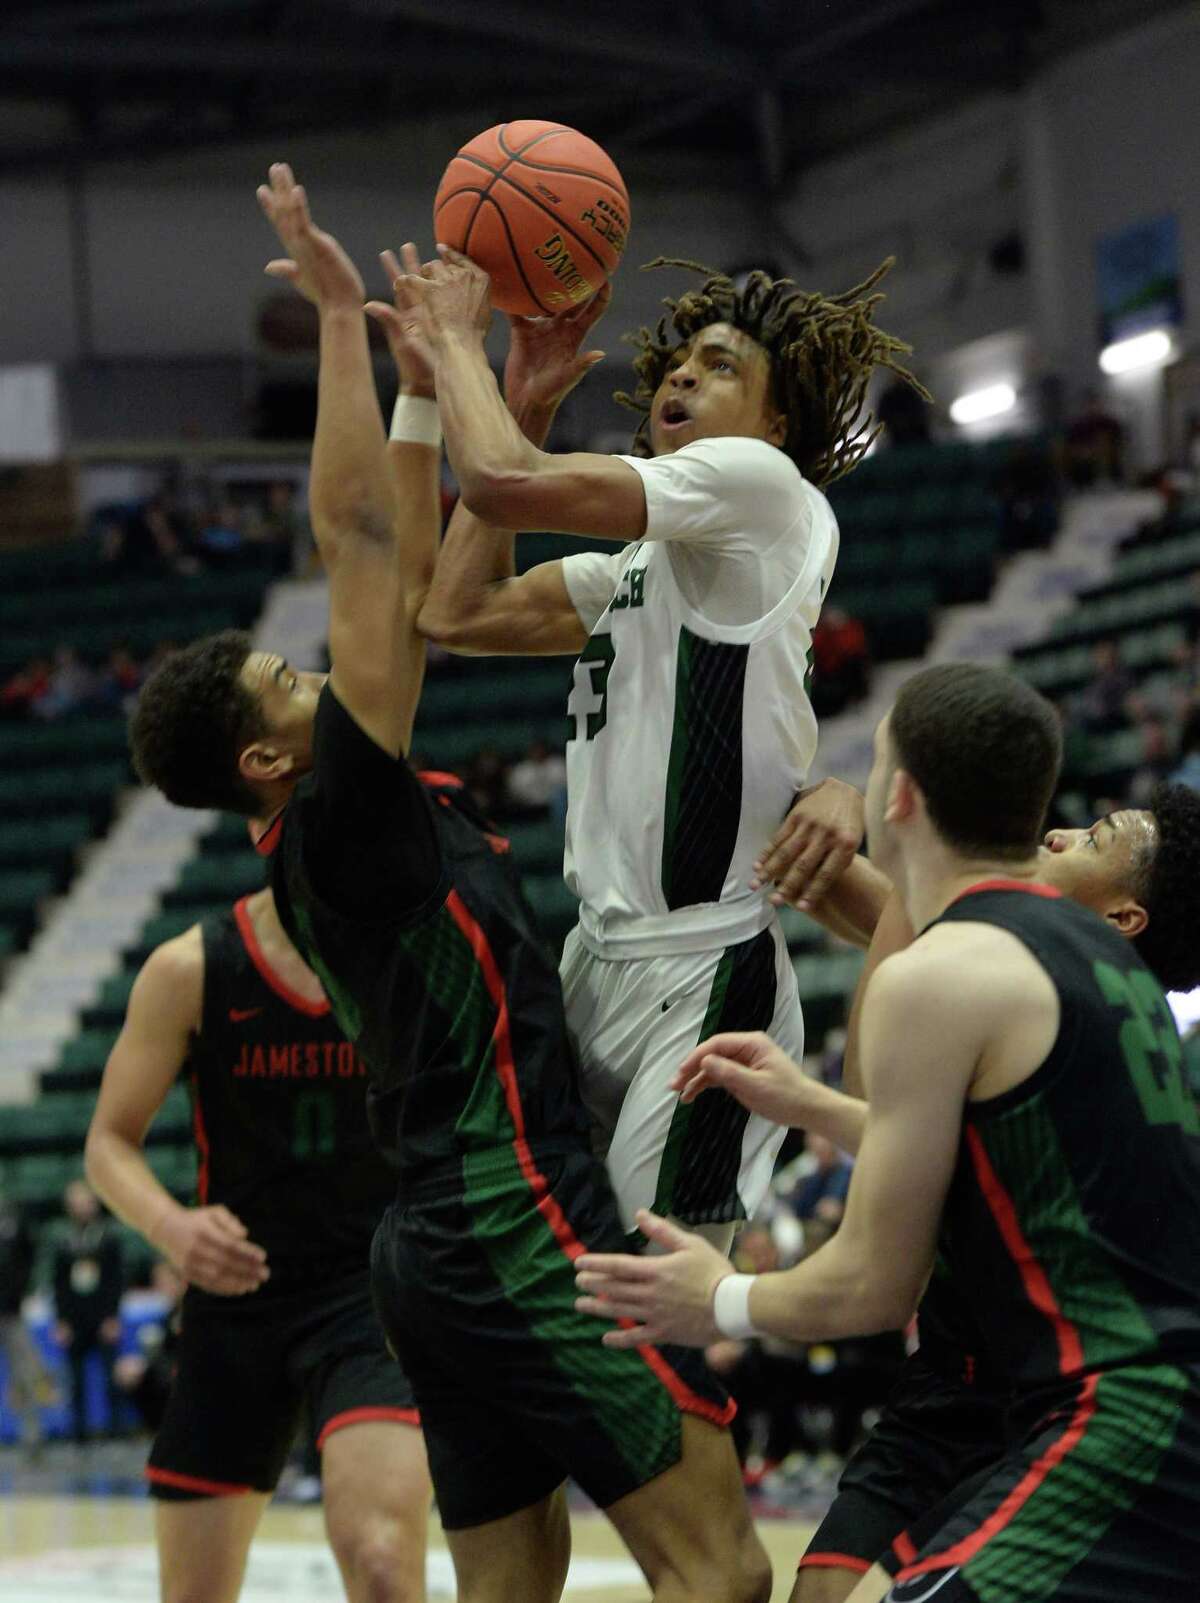 Green Tech’s Zaveon Little rises from a sea of Jamestown players to shoot the ball during their Class AA state semifinal match at Cool Insuring Arena in Glens Falls, N.Y. on Friday, Mar. 18, 2022. (Jenn March, Special to the Times Union)